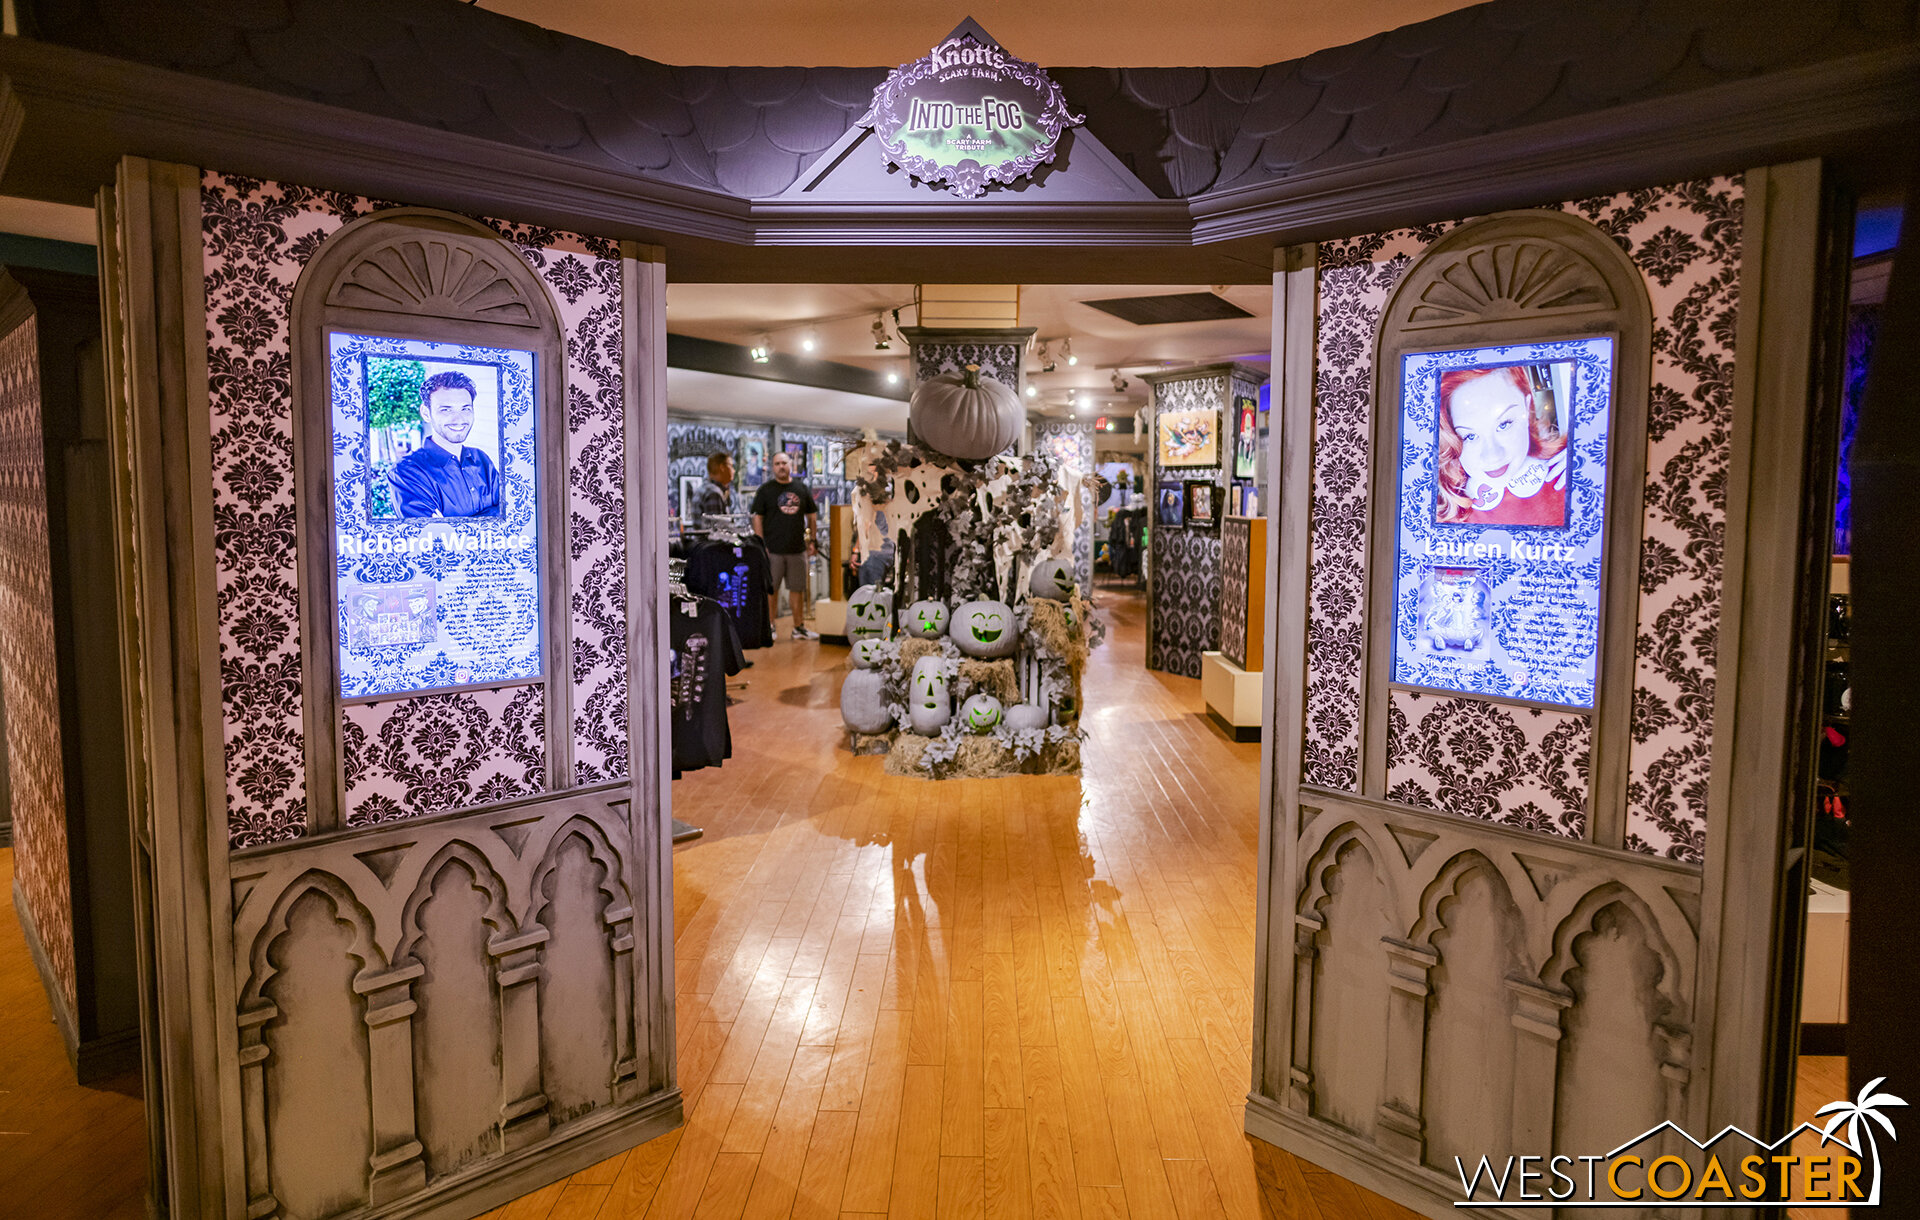  Artist bios are rotated on dual screens at the entrance portal inside the store. 